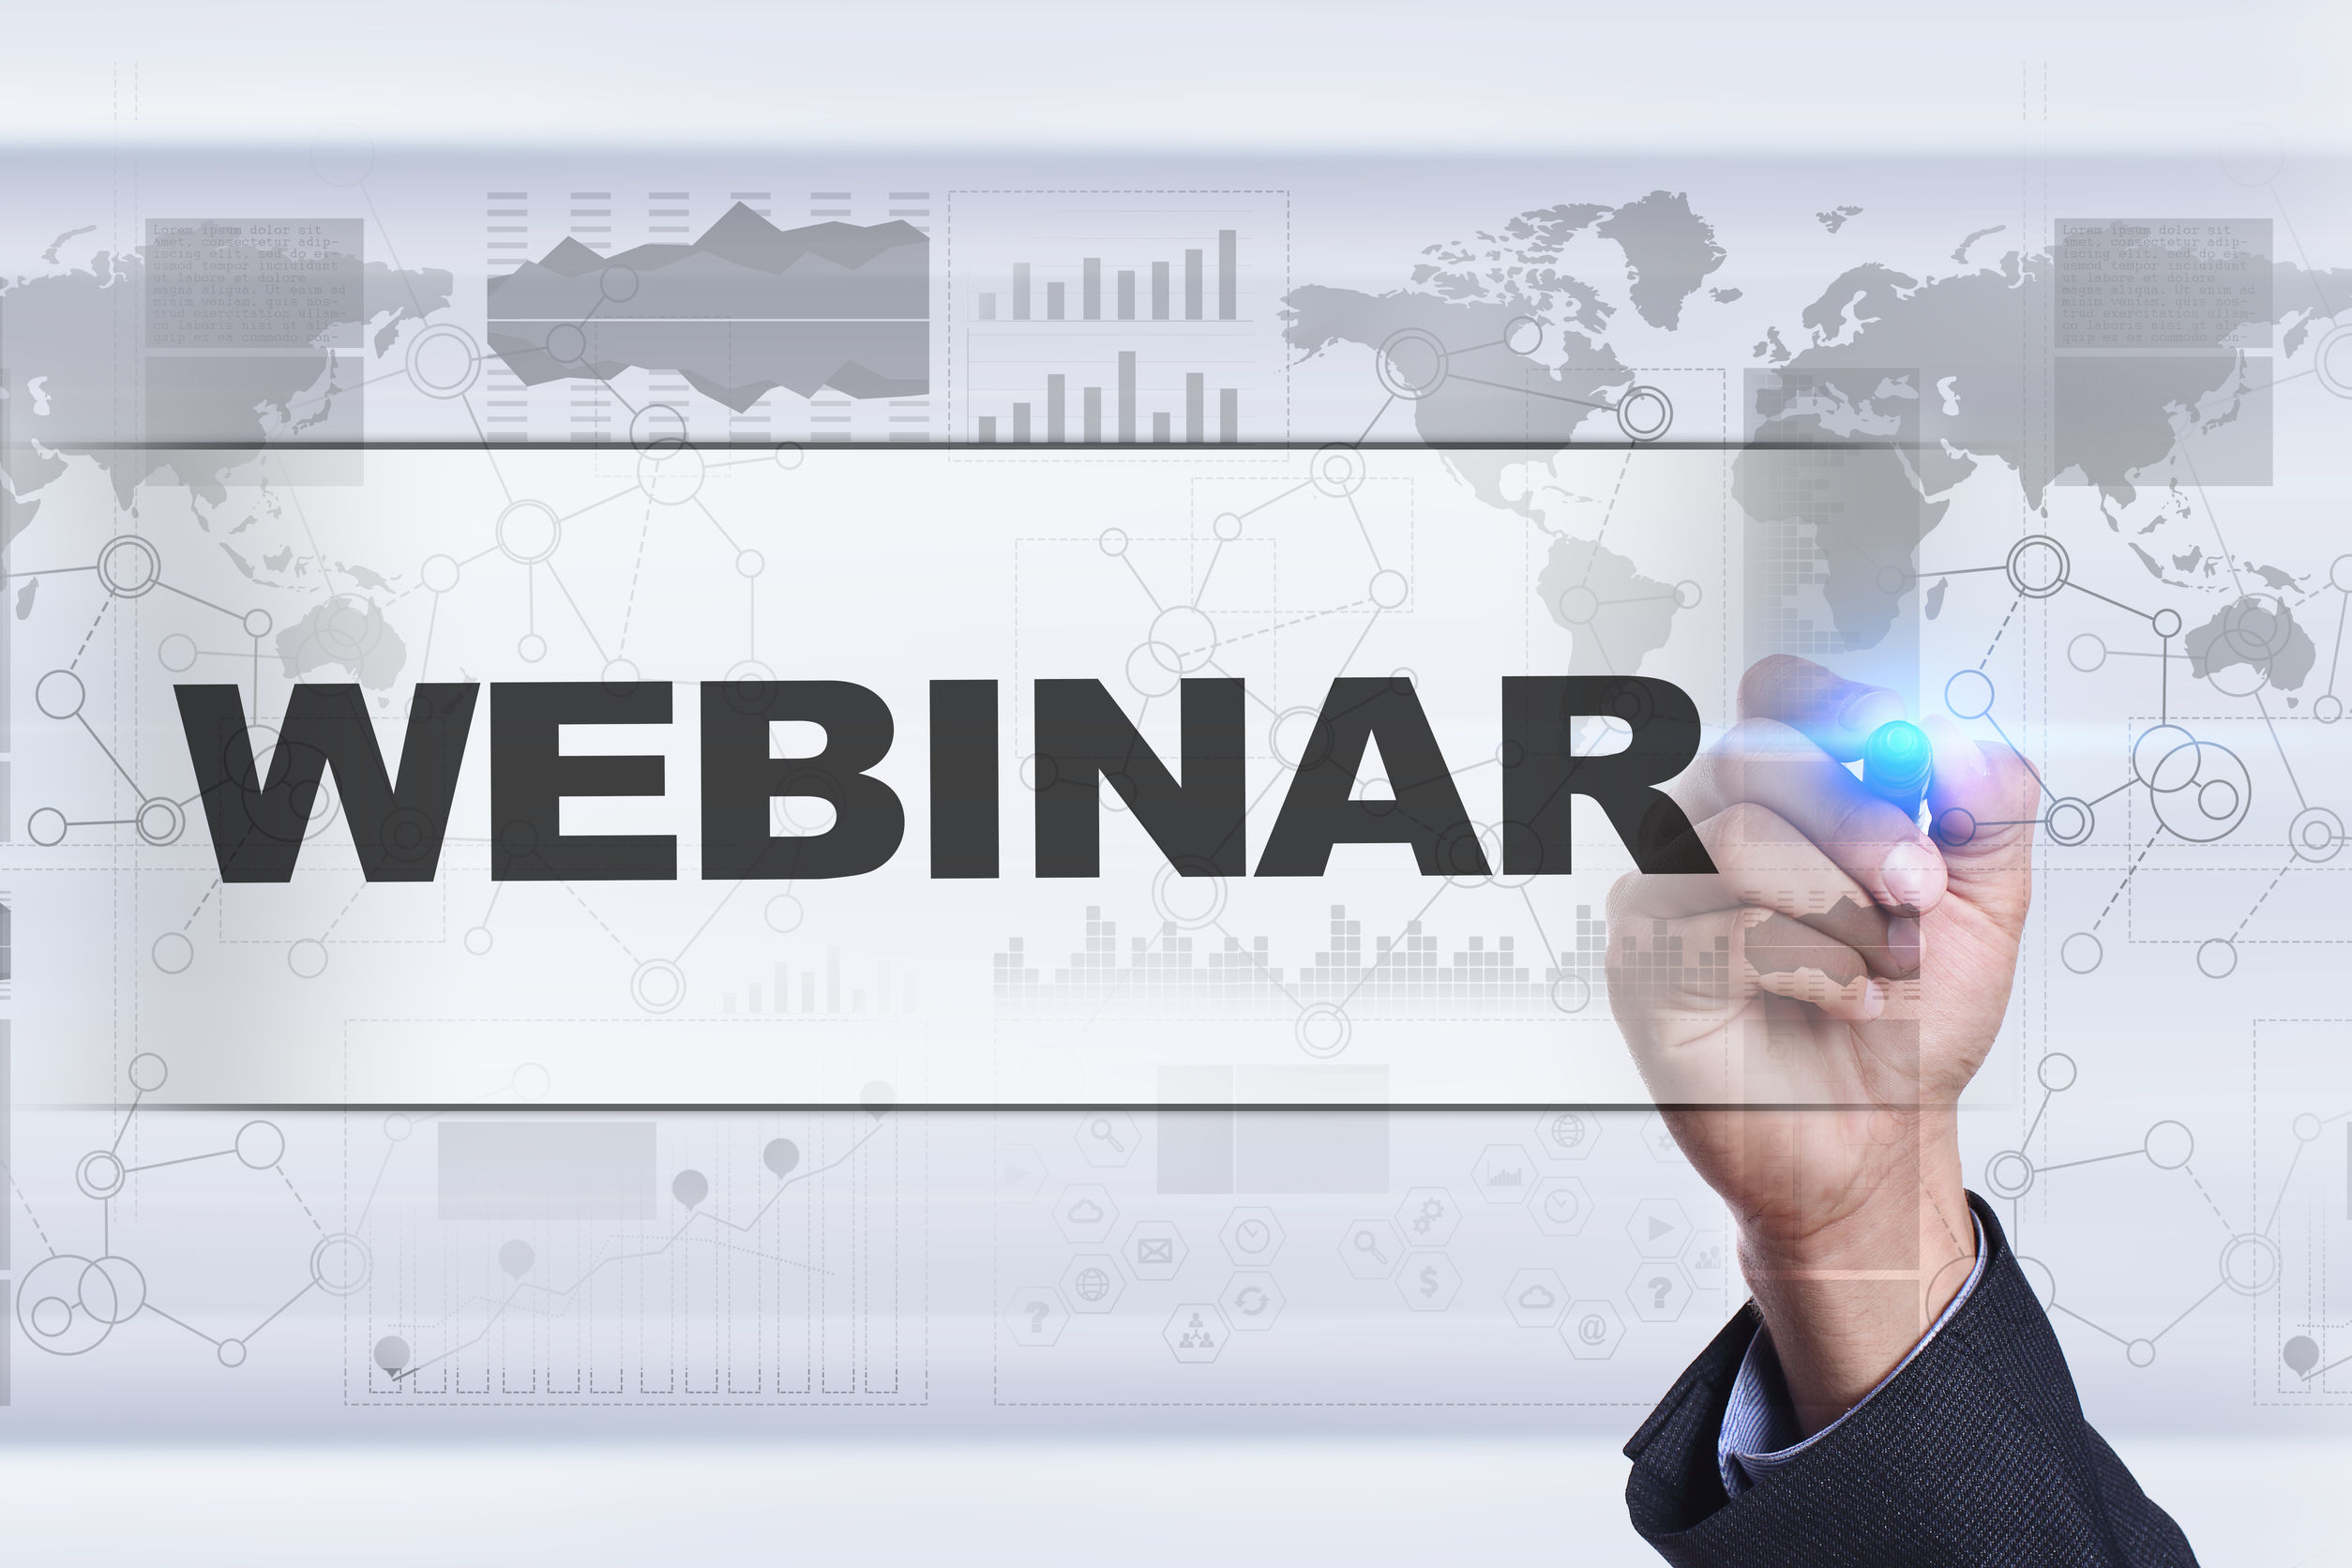 See aACE in Action in Our April Webinars